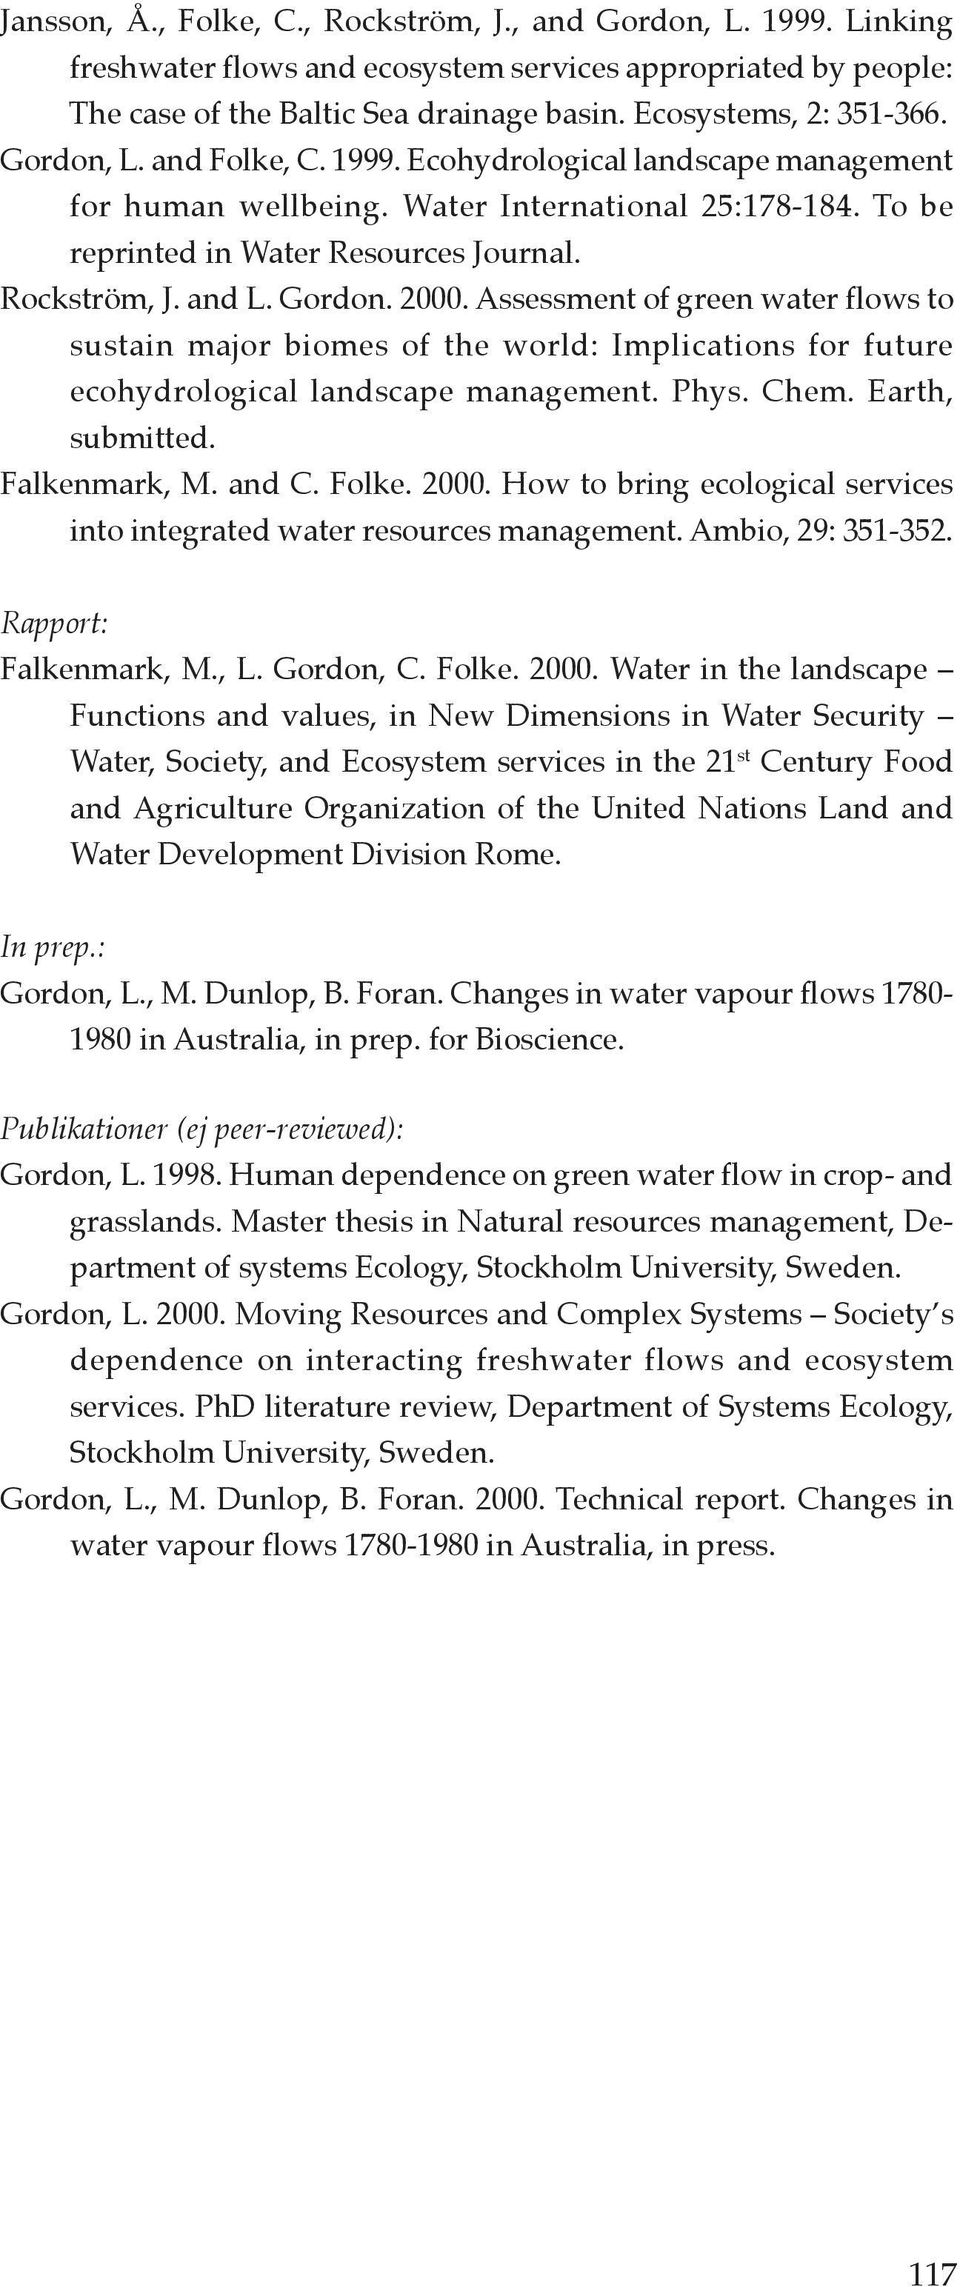 Assessment of green water flows to sustain major biomes of the world: Implications for future ecohydrological landscape management. Phys. Chem. Earth, submitted. Falkenmark, M. and C. Folke. 2000.